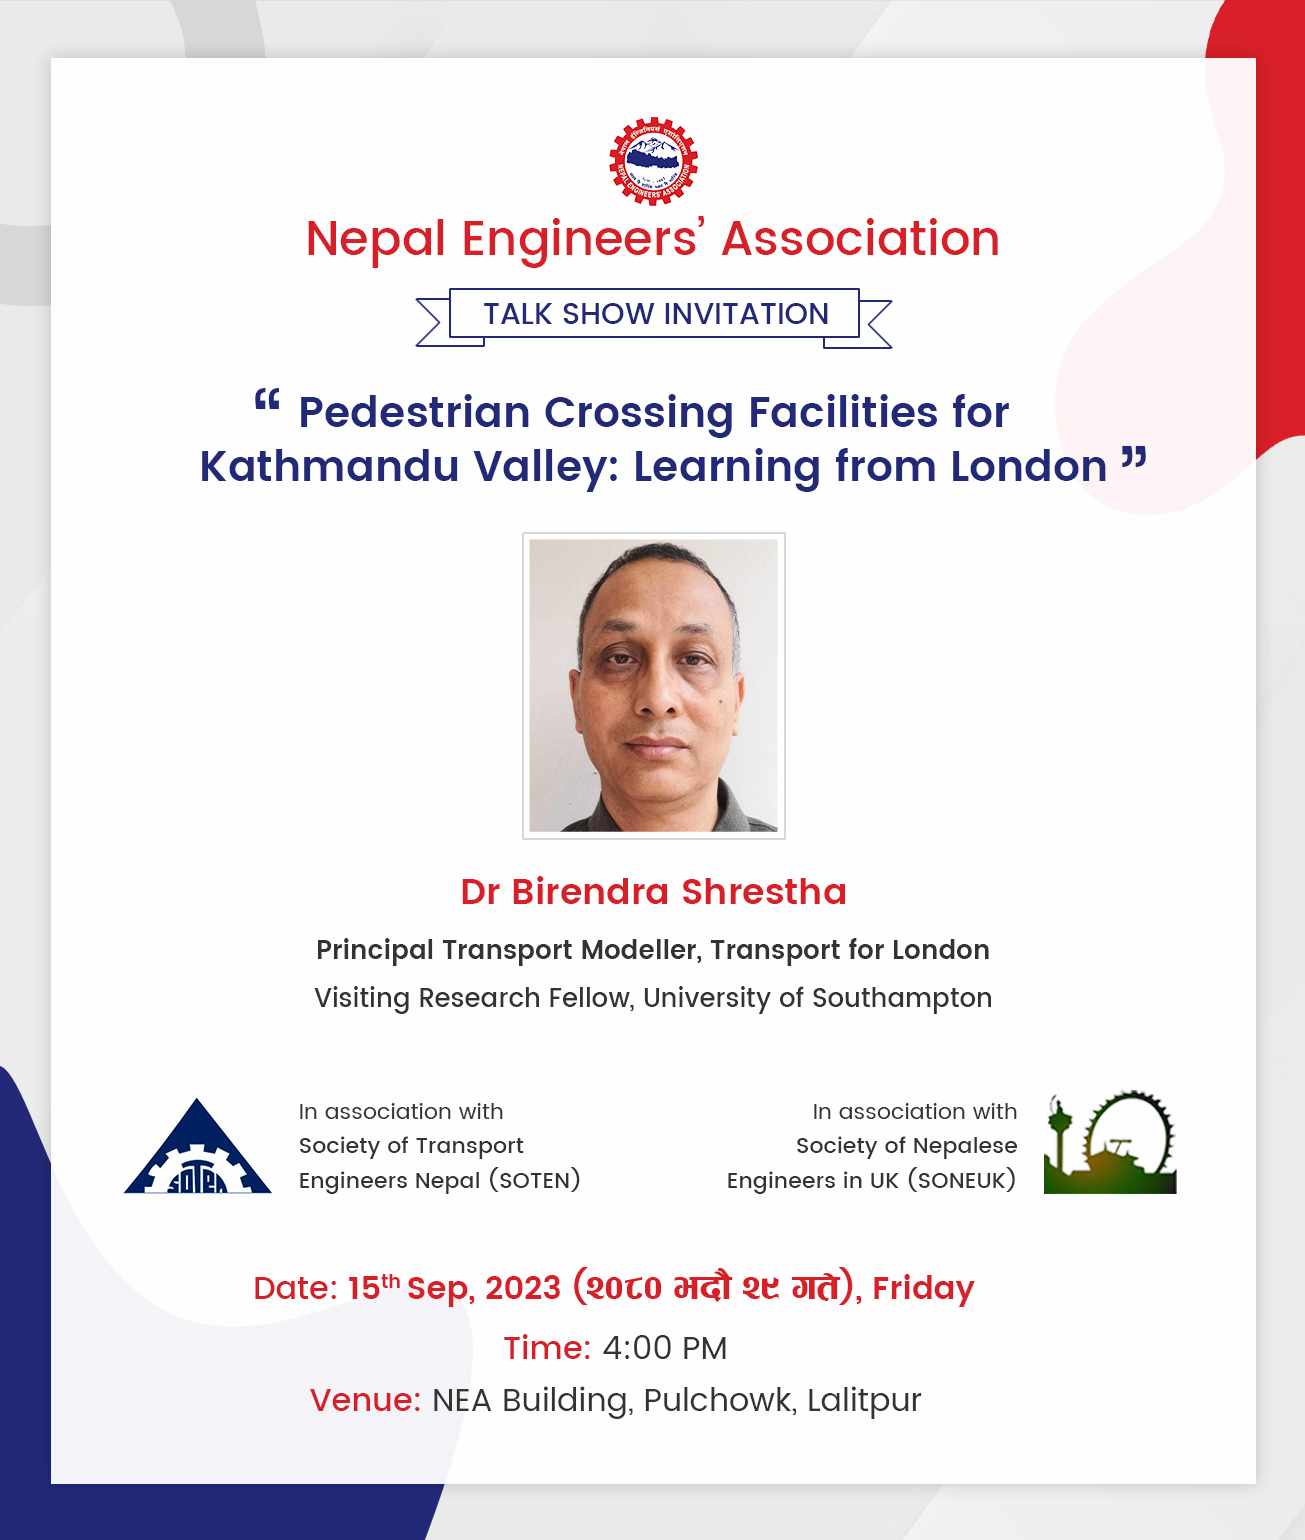 Pedestrian Crossing Facilities for Kathmandu Valley: Learning from London